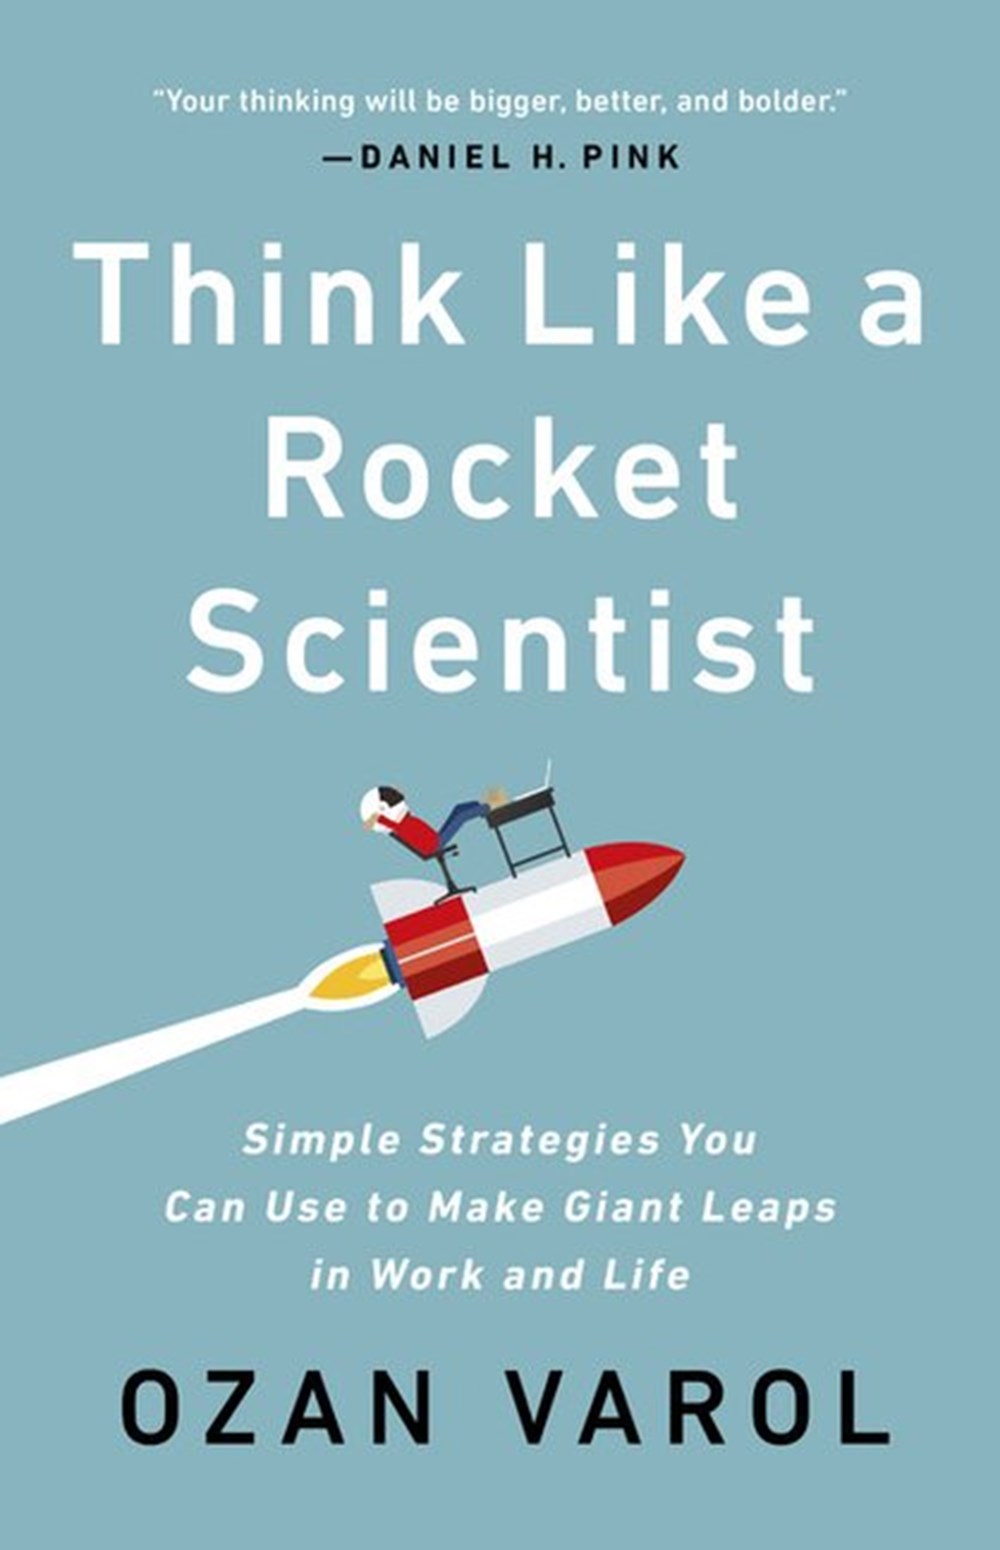 Think Like a Rocket Scientist Simple Strategies You Can Use to Make Giant Leaps in Work and Life